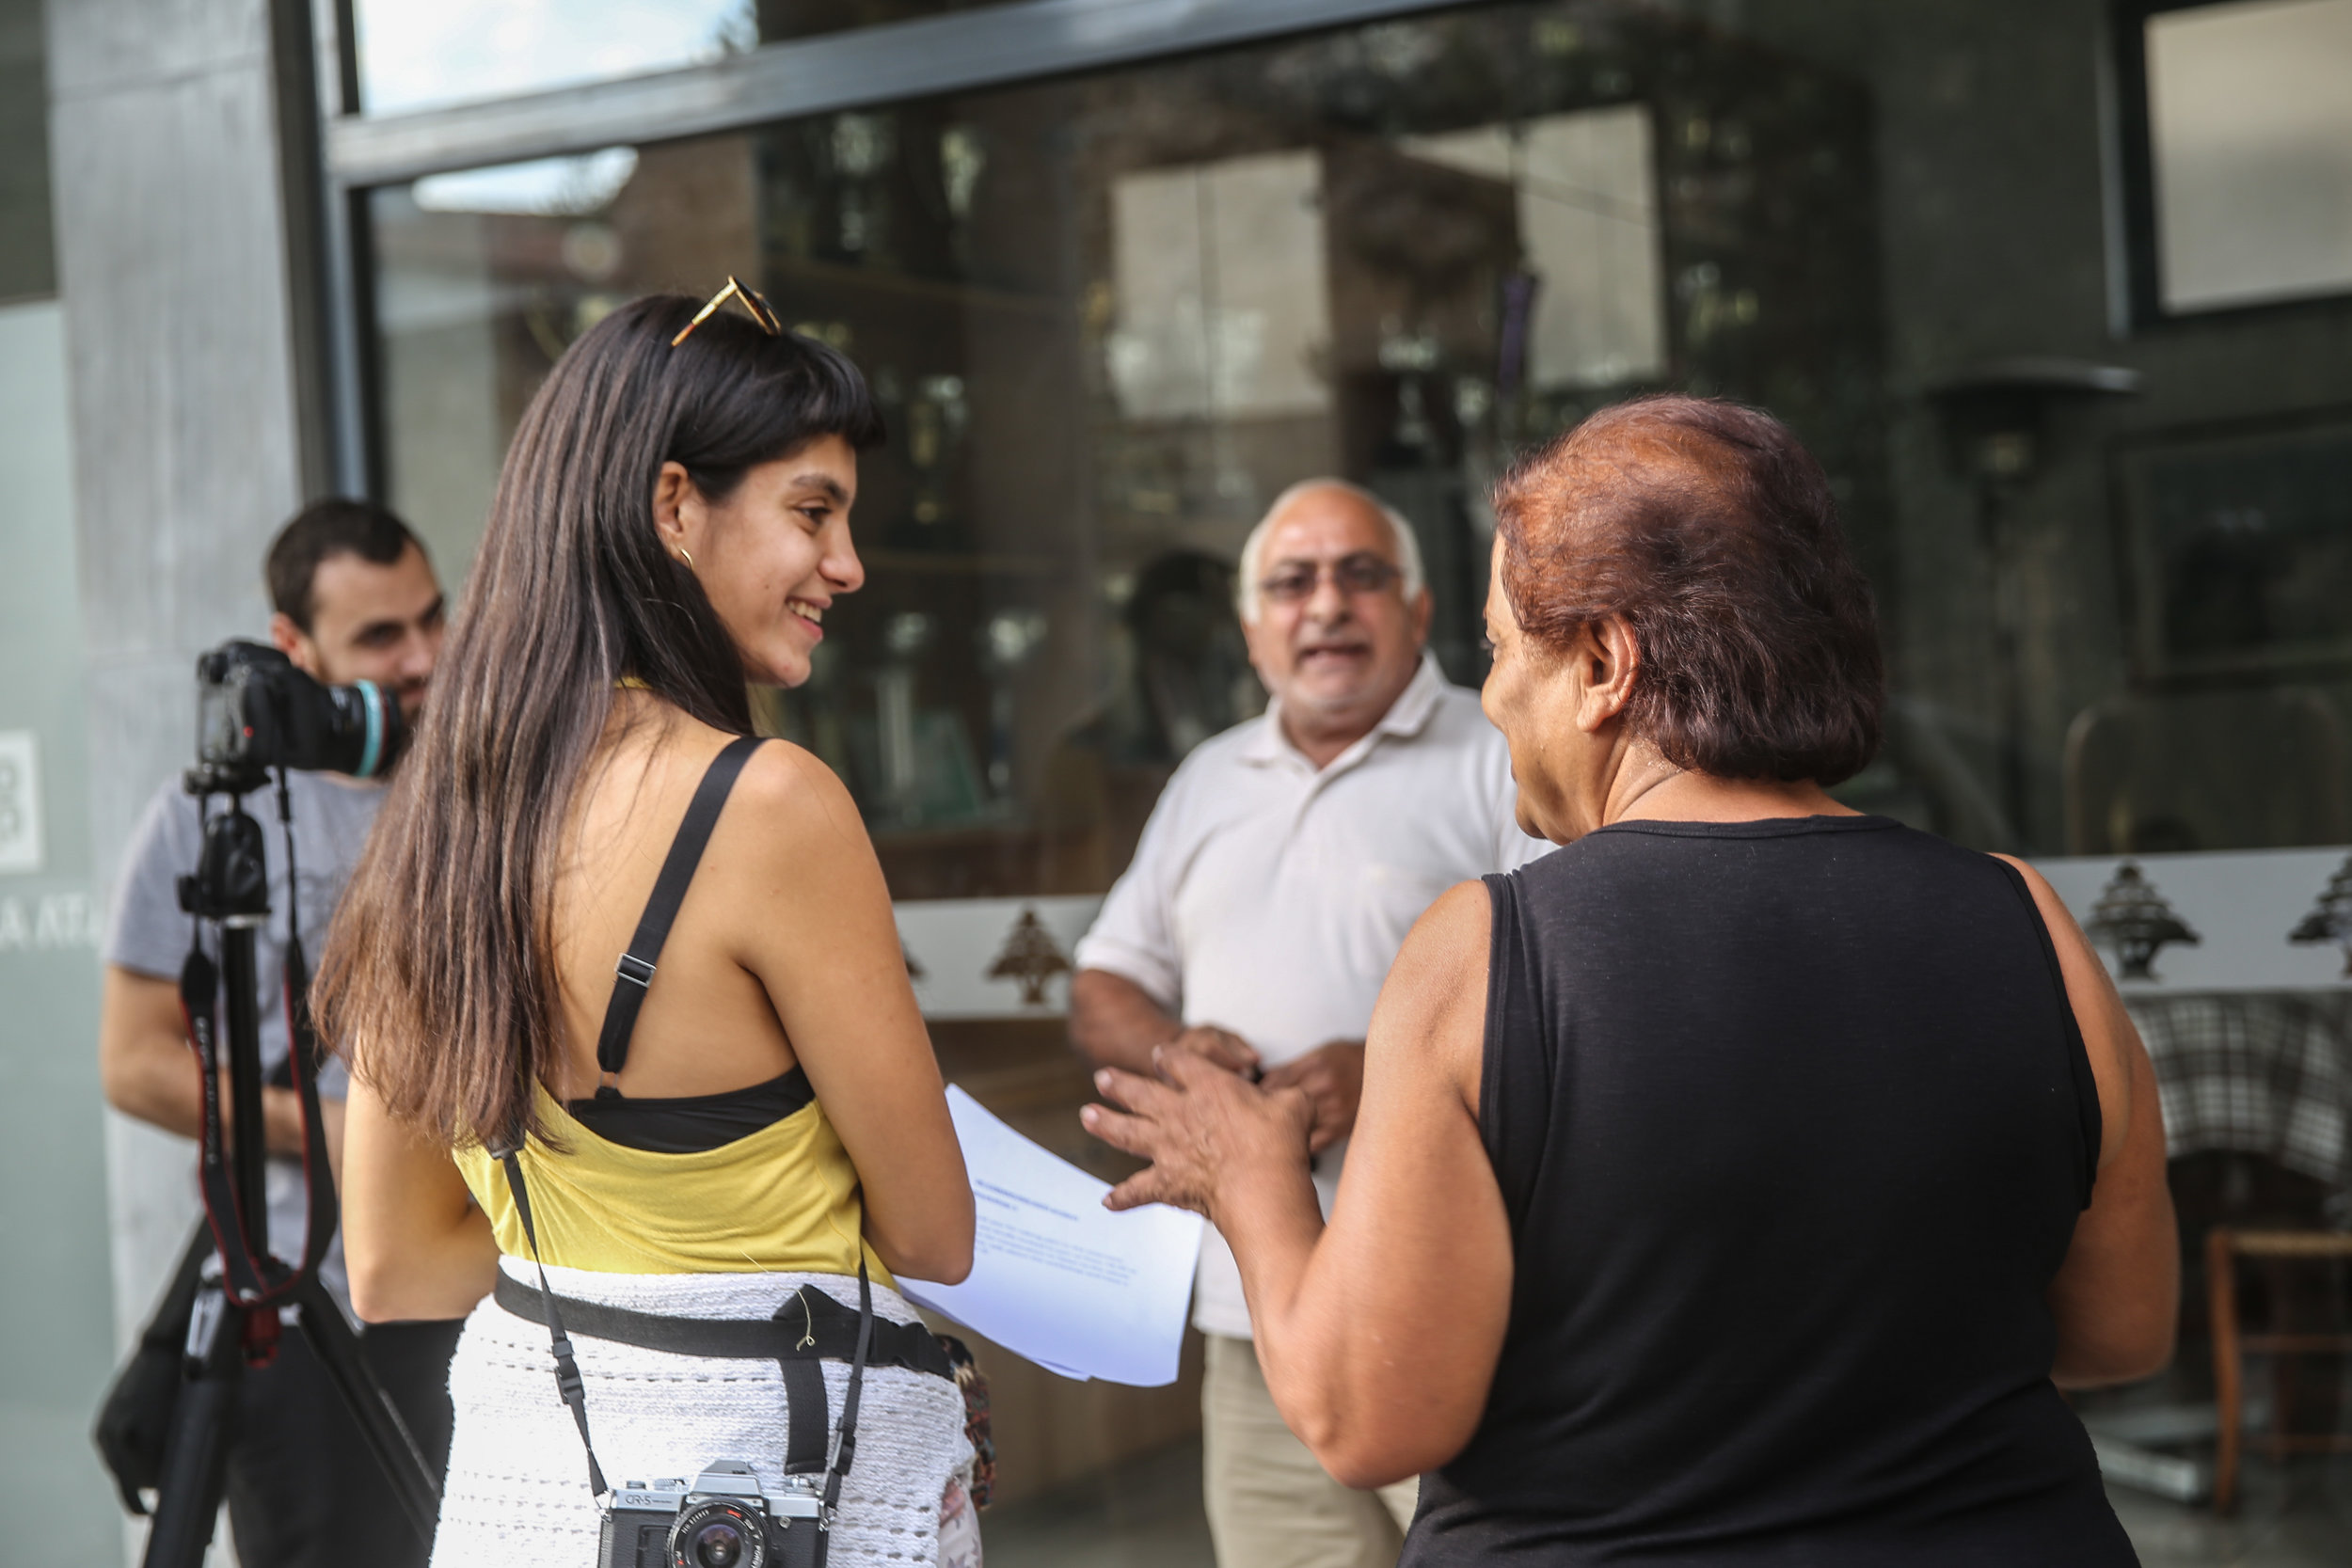 Talking with locals in Nicosia, Cyprus